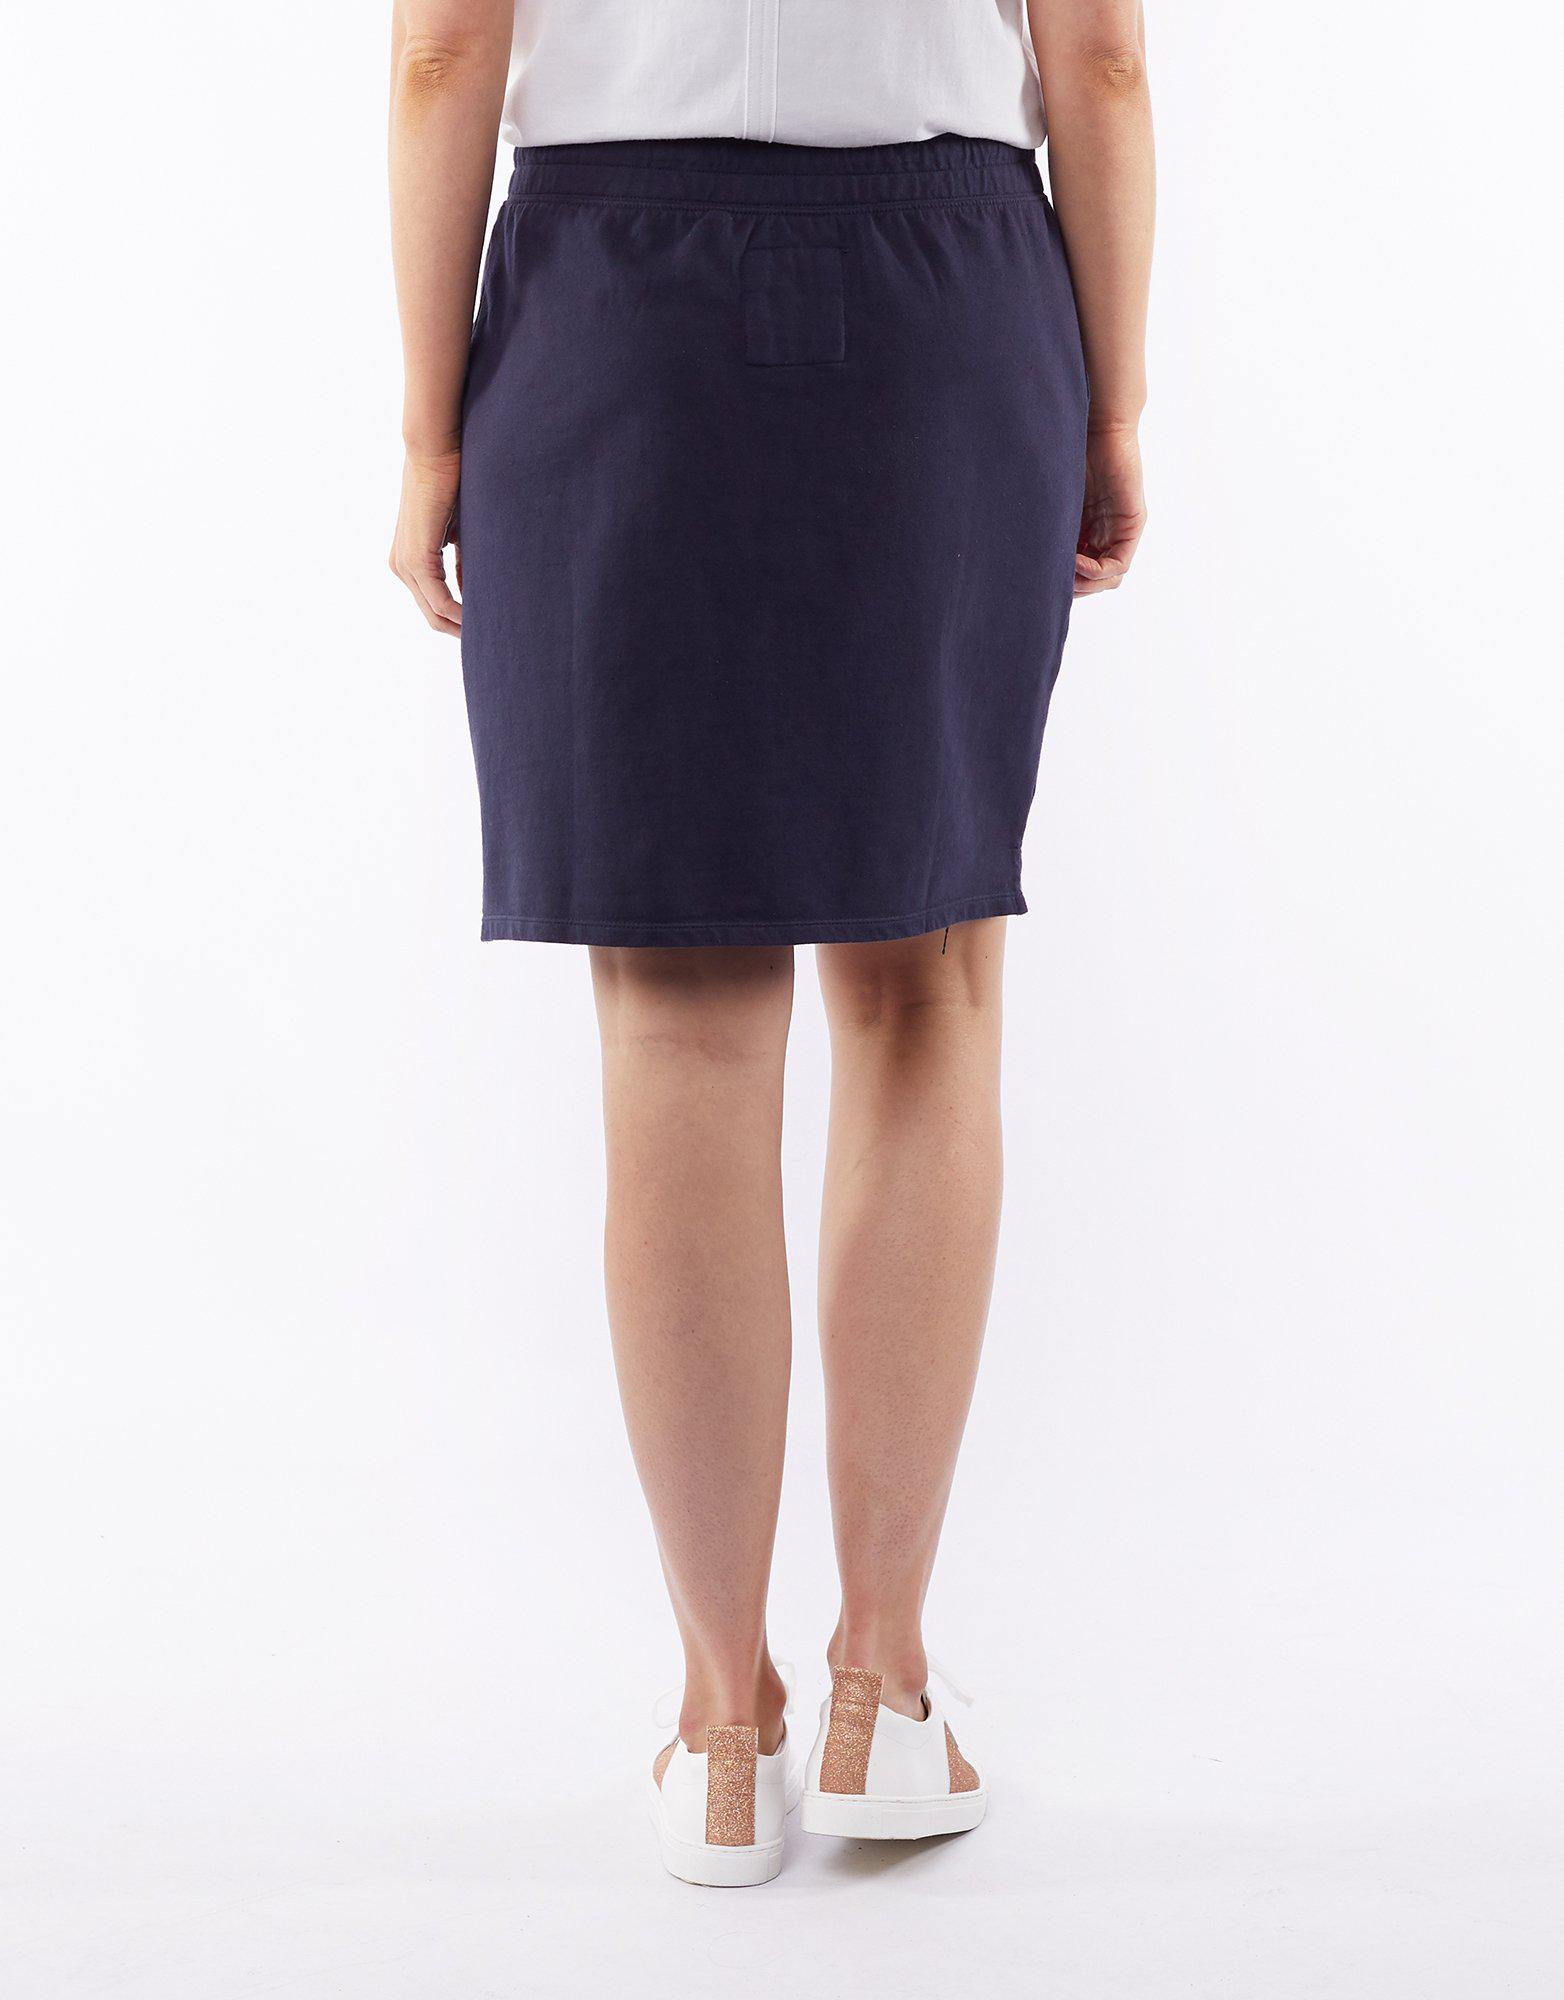 Cassie Skirt - Navy - Elm Lifestyle - FUDGE Gifts Home Lifestyle